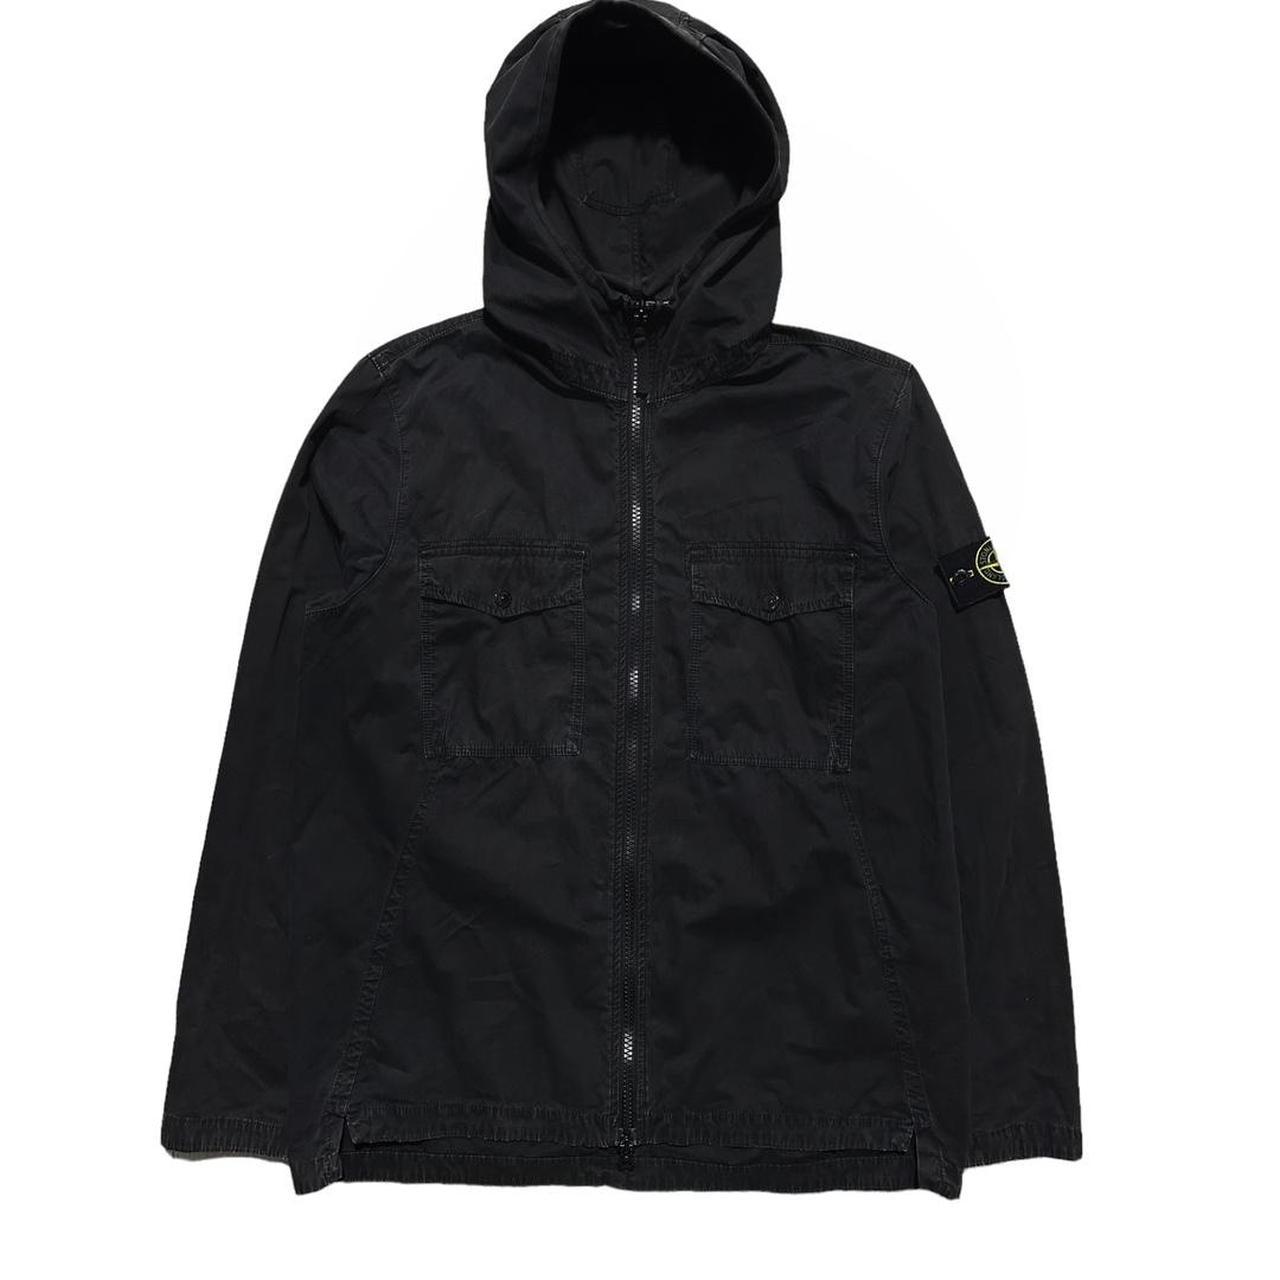 Stone Island Black Canvas Hooded Overshirt - Known Source